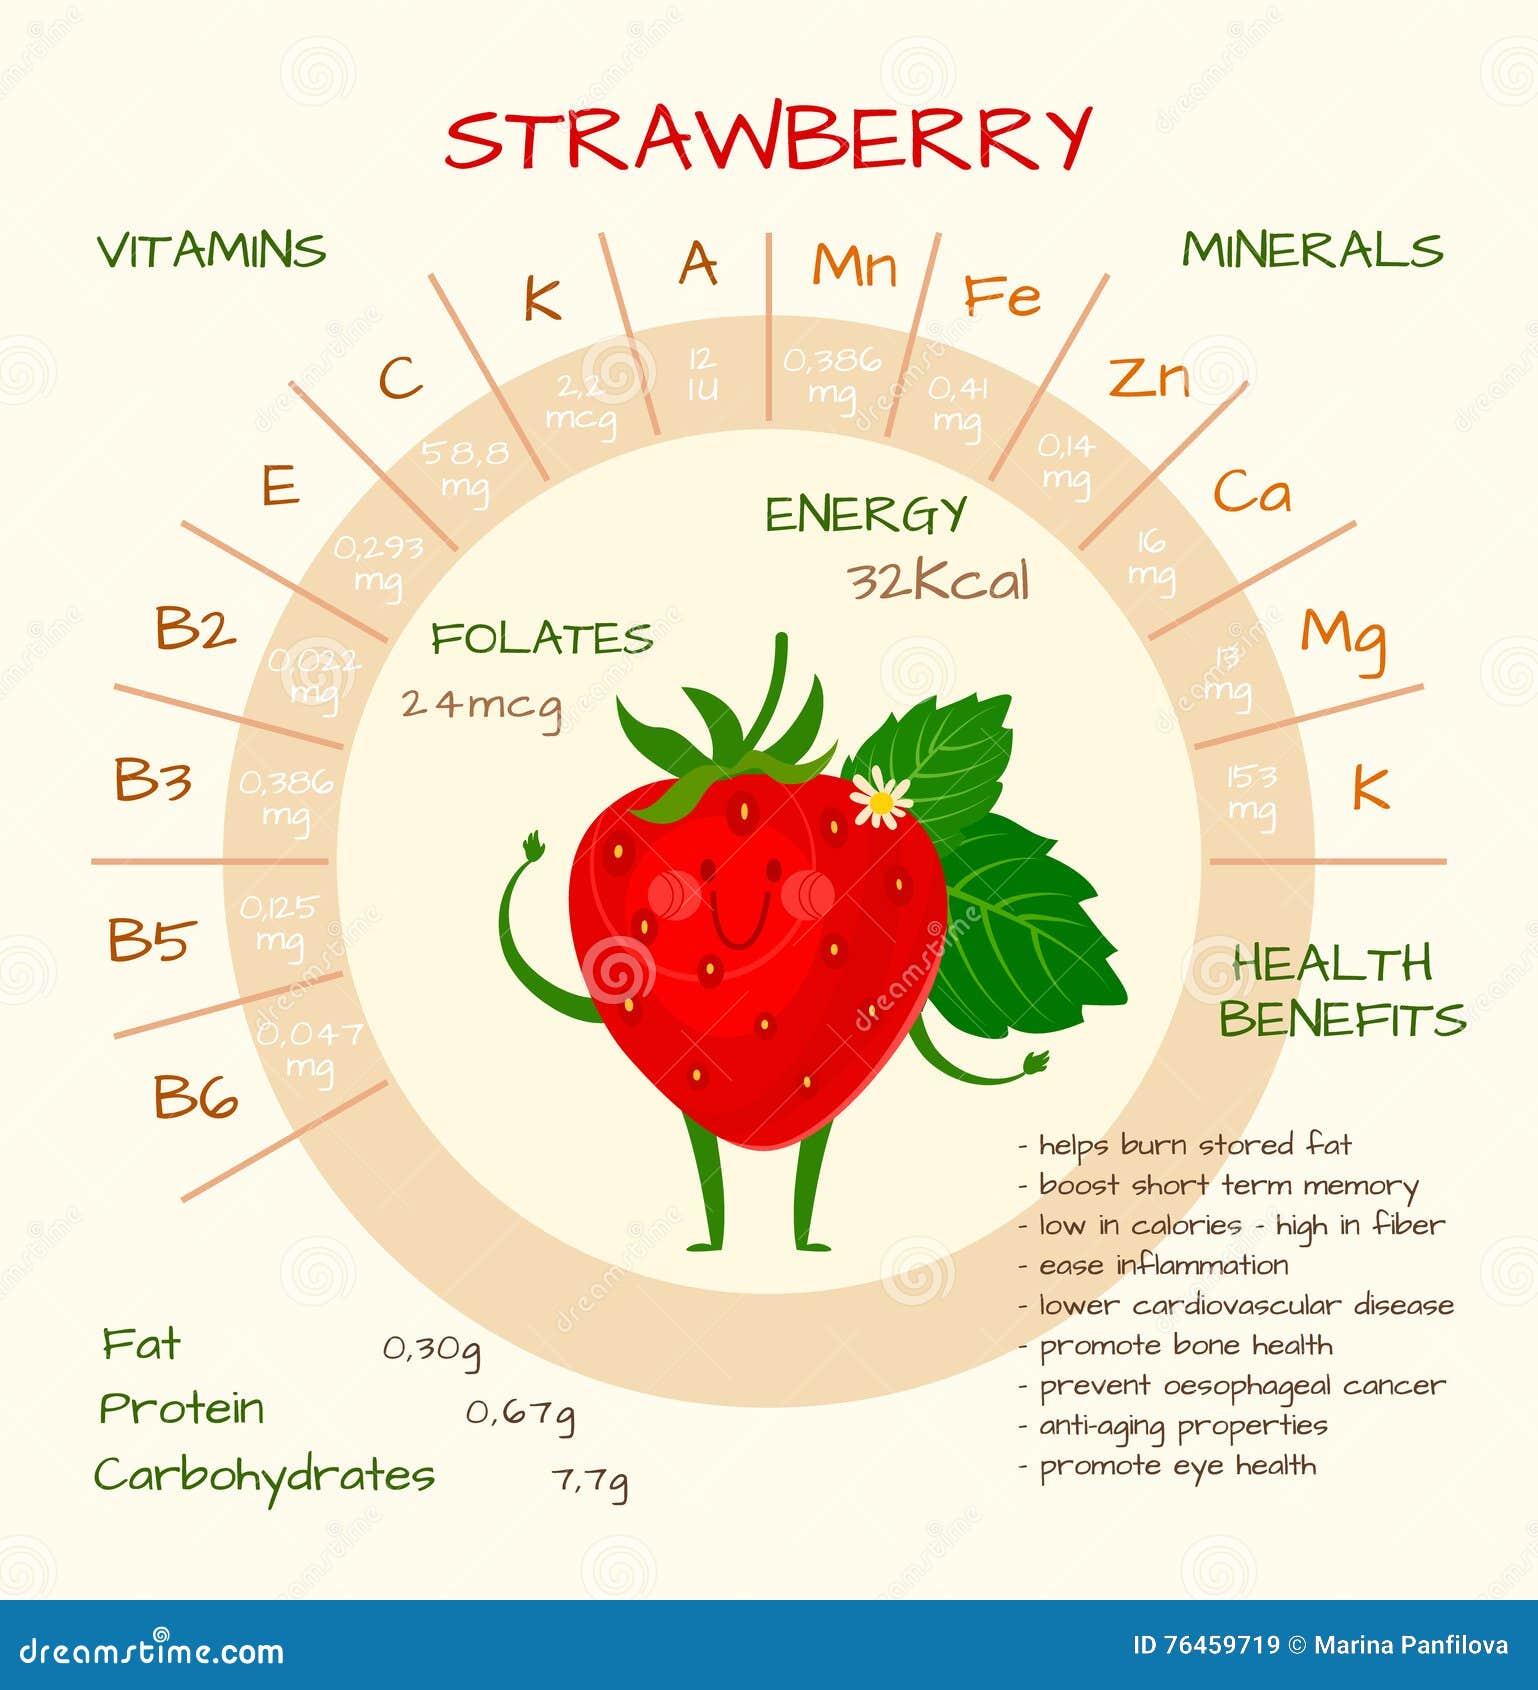 https://thumbs.dreamstime.com/z/dieting-nutrition-concept-cute-infographic-health-benefits-strawberry-healthy-lifestyle-vitamins-contained-gooseberry-76459719.jpg